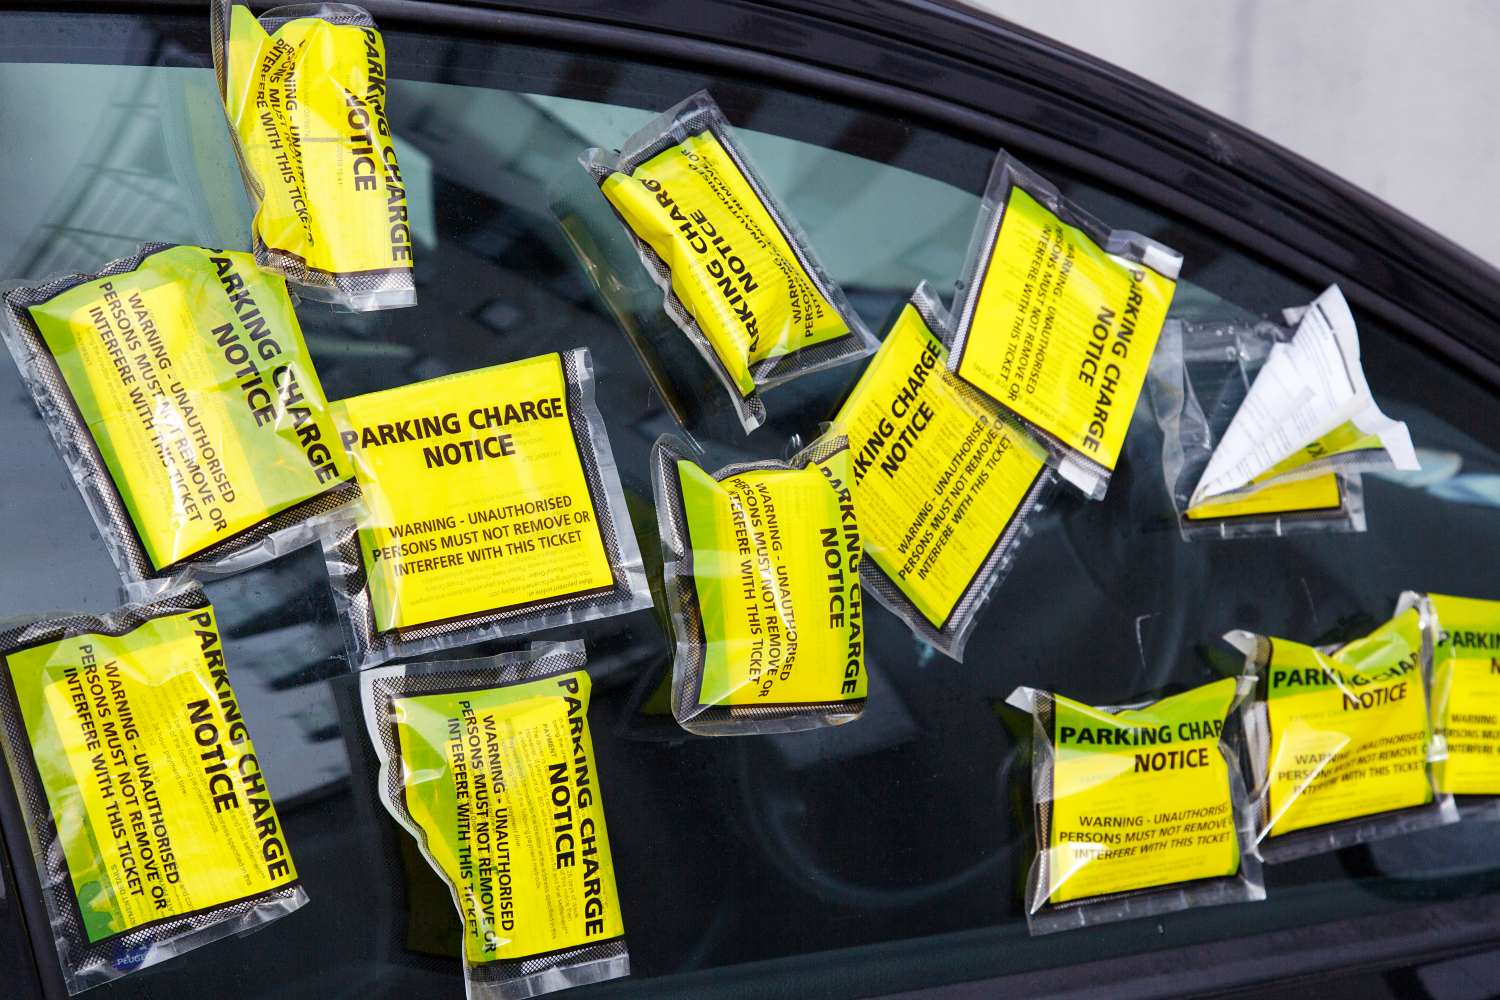 window-covered-in-parking-tickets.jpg